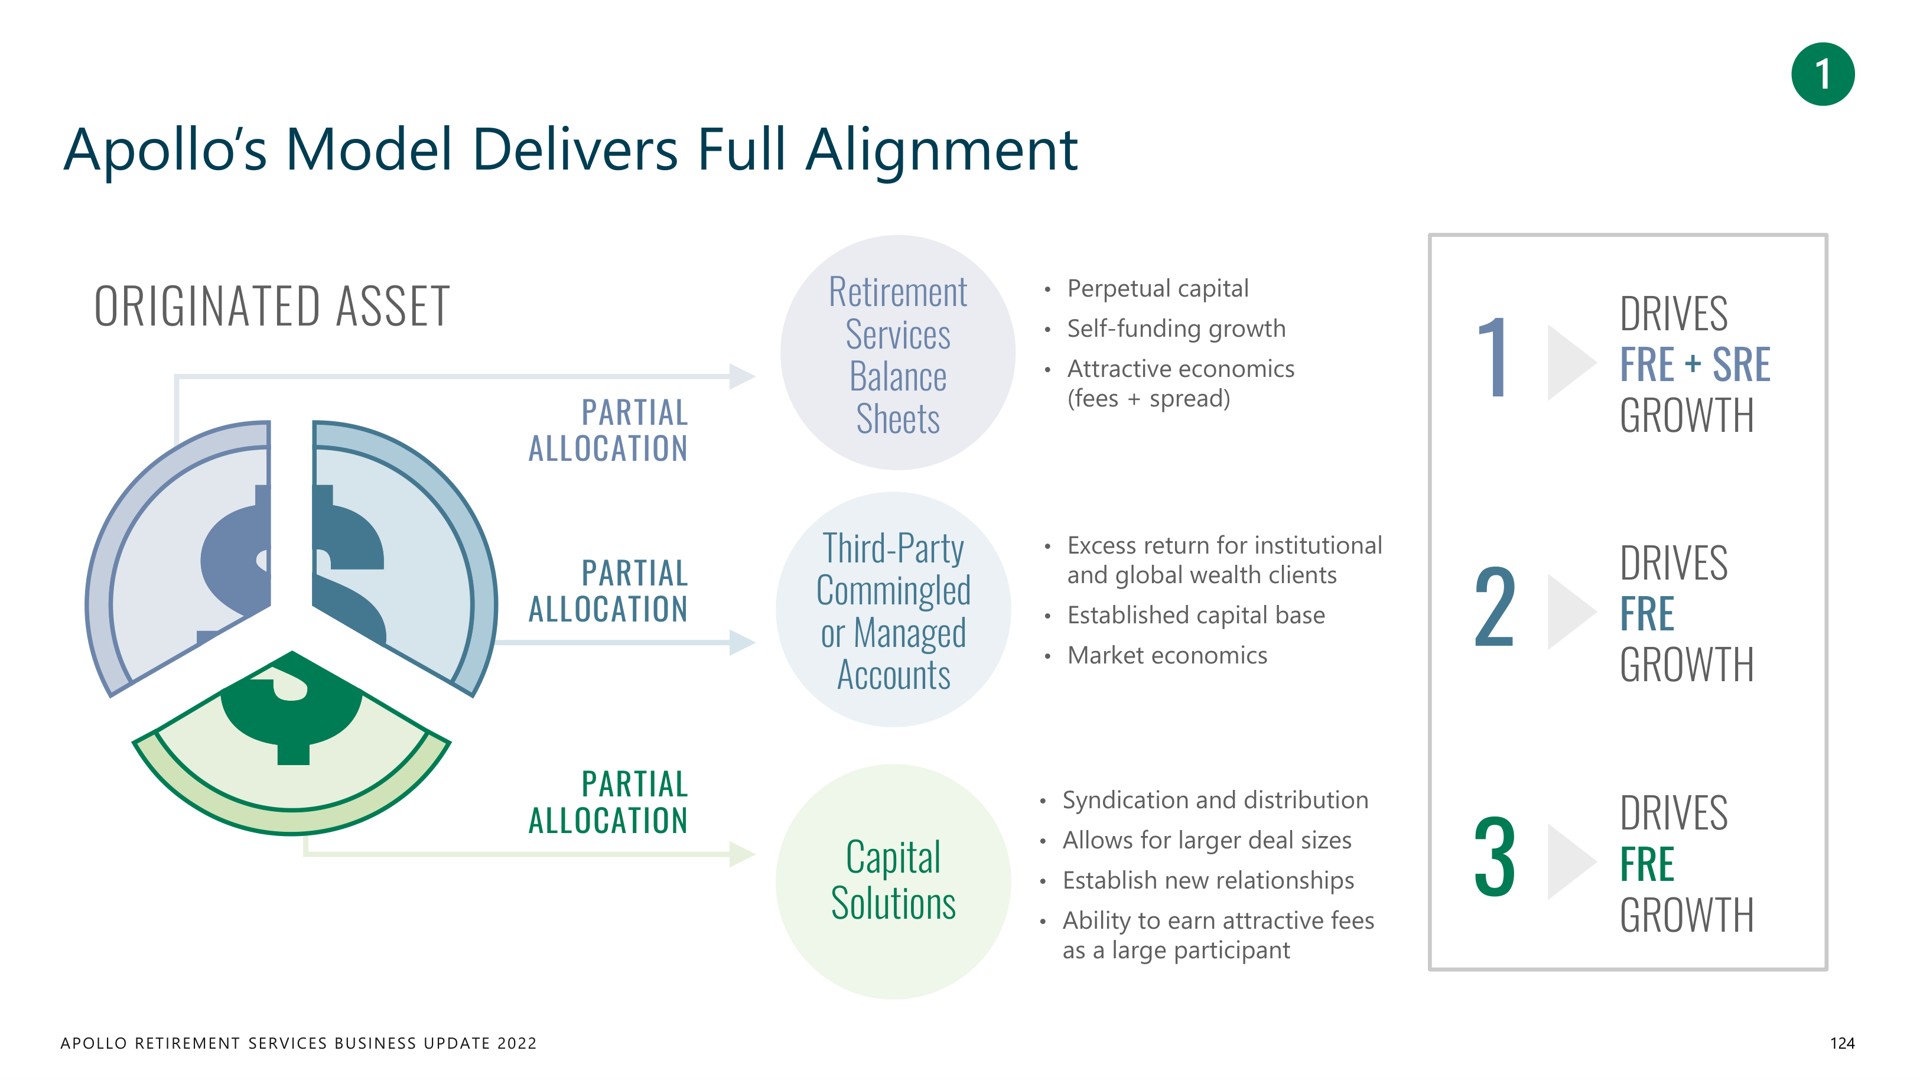 model delivers full alignment | Apollo Global Management